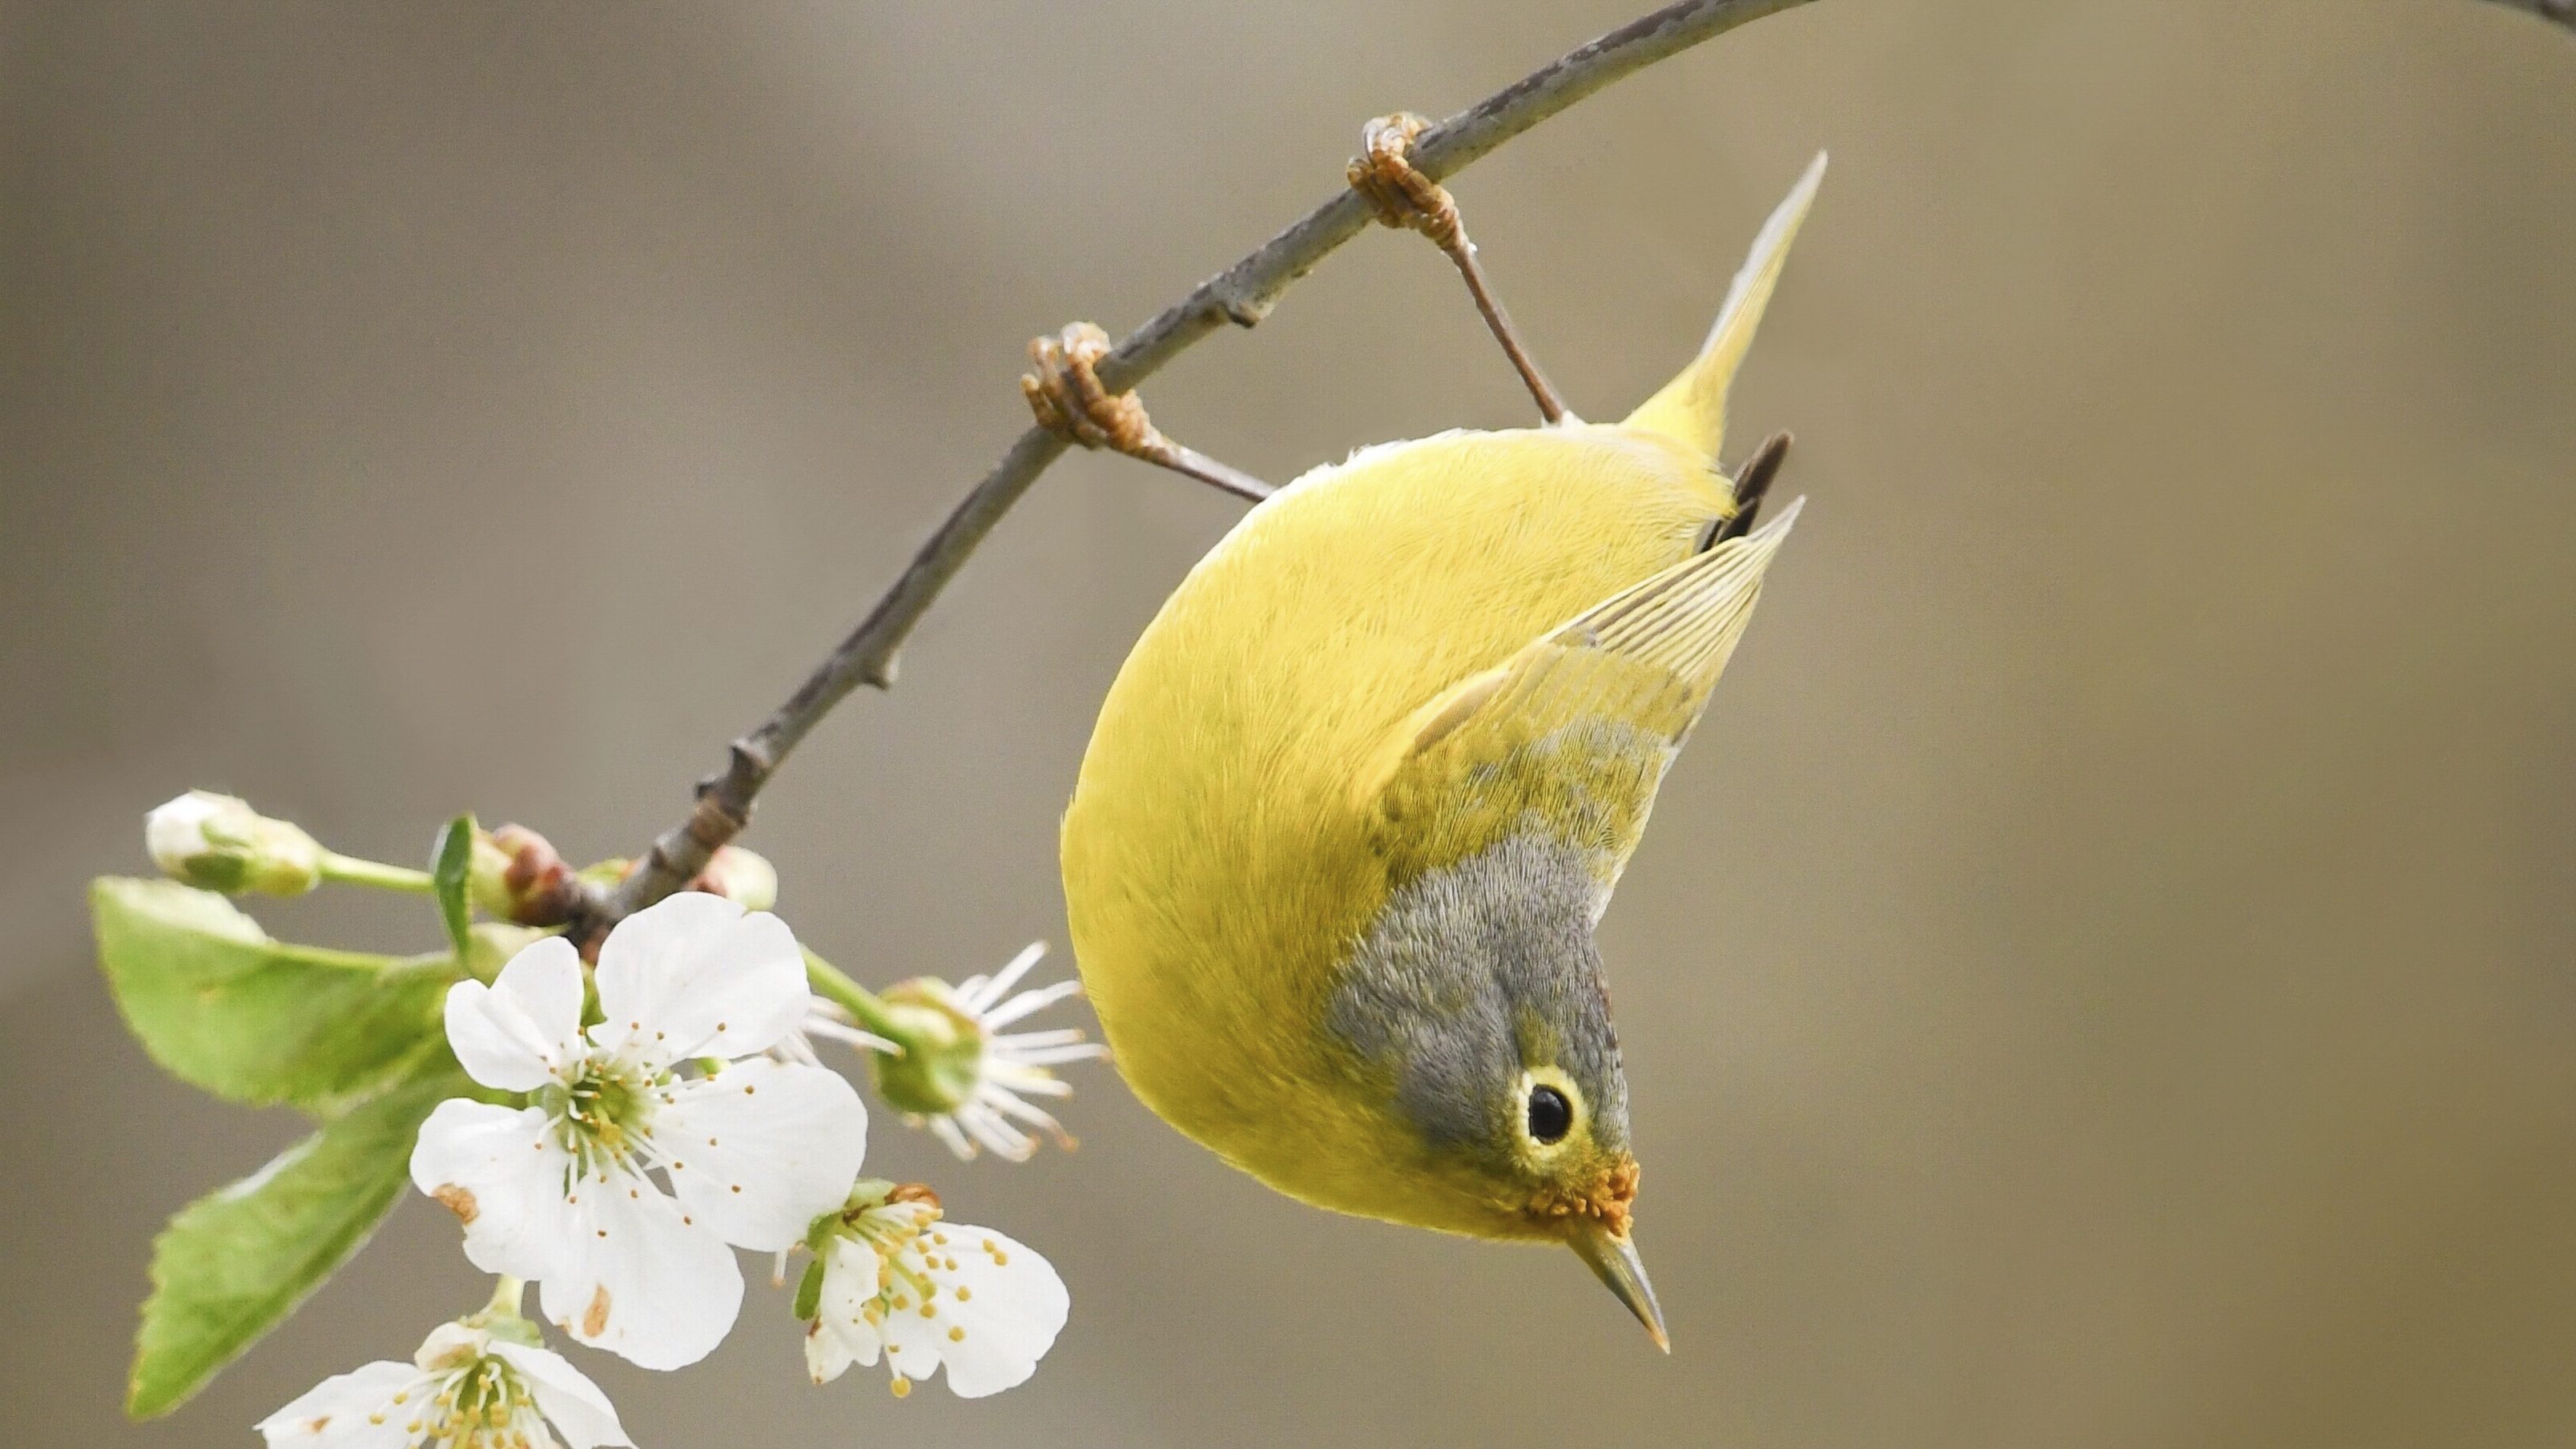 small yellow and grey bird hanging upside-down on.a branch with a flower